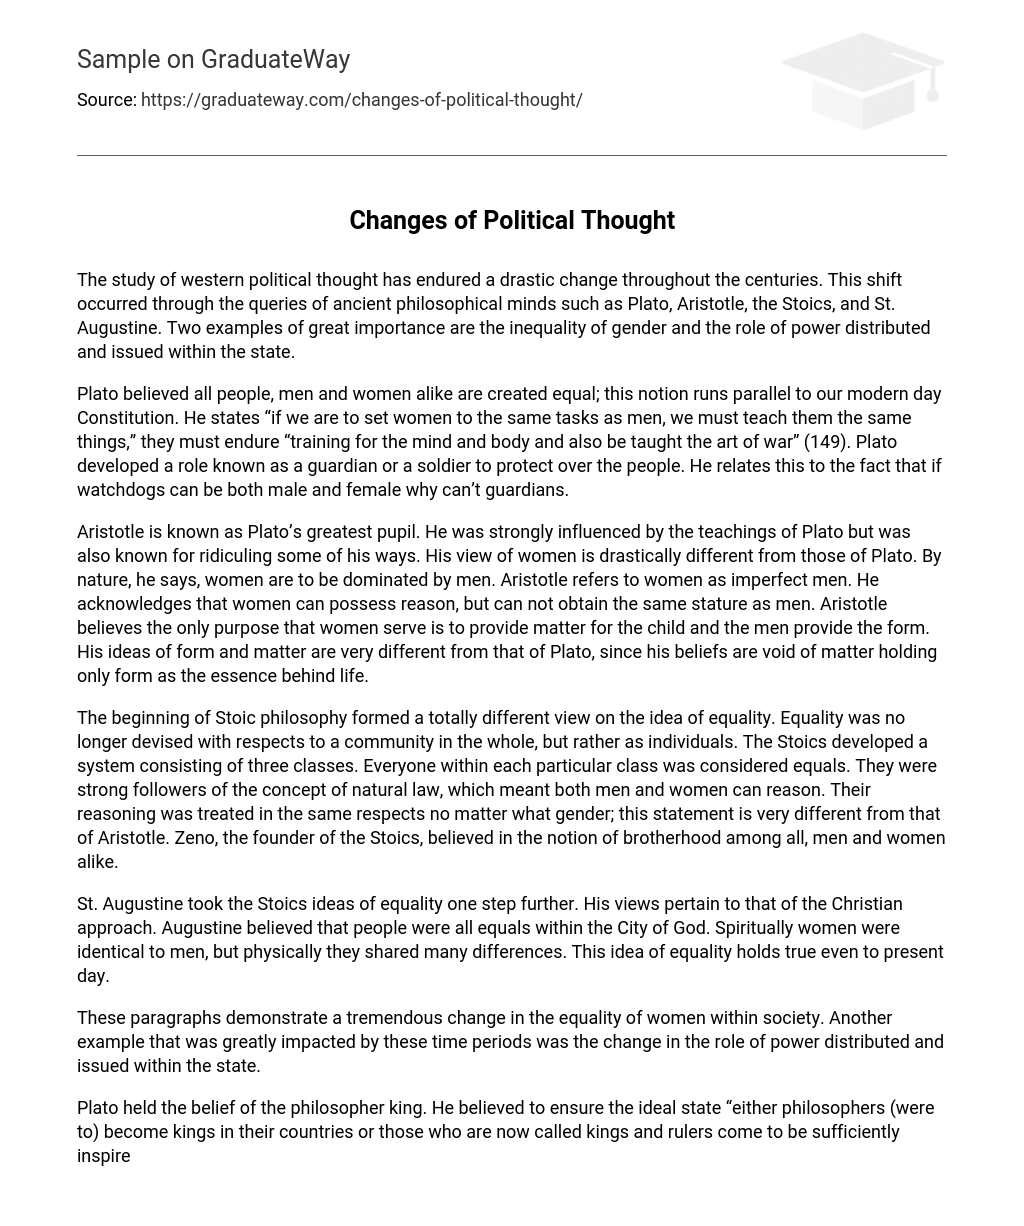 Changes of Political Thought